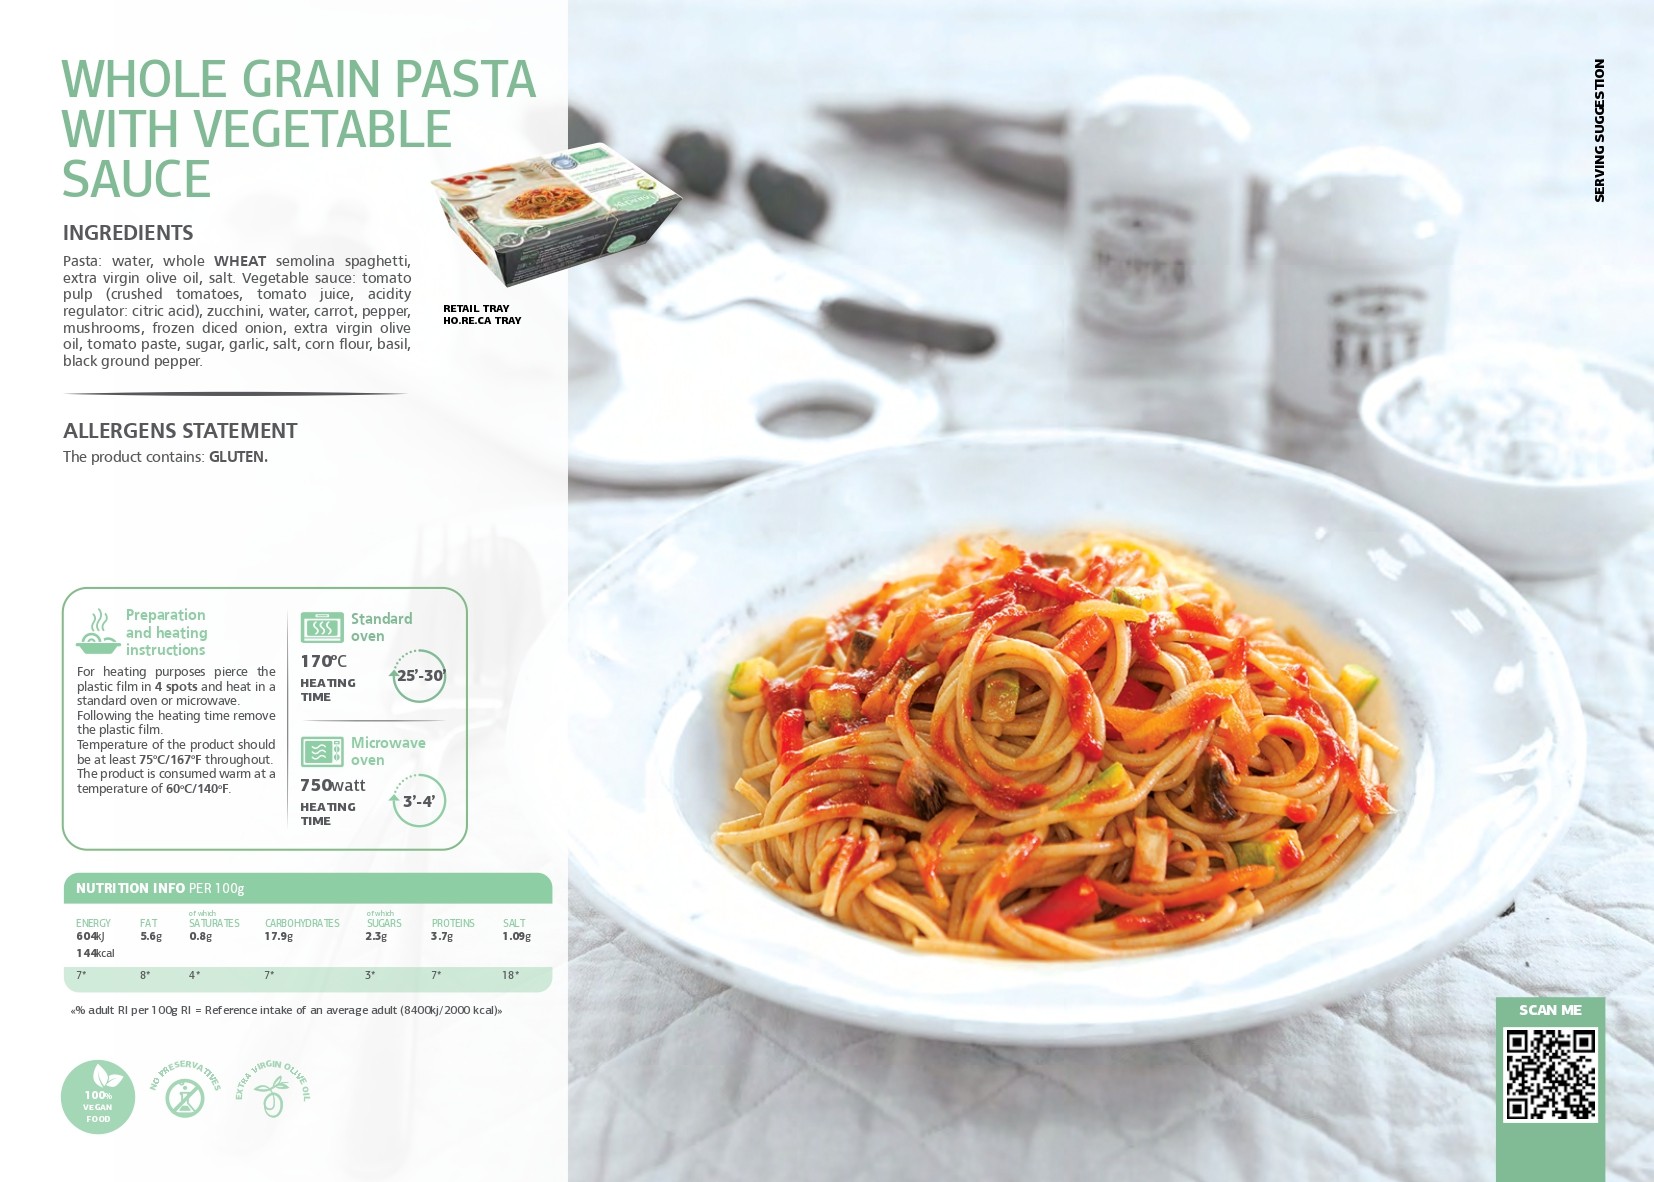 SK - Whole grain pasta with vegetable sauce pdf image